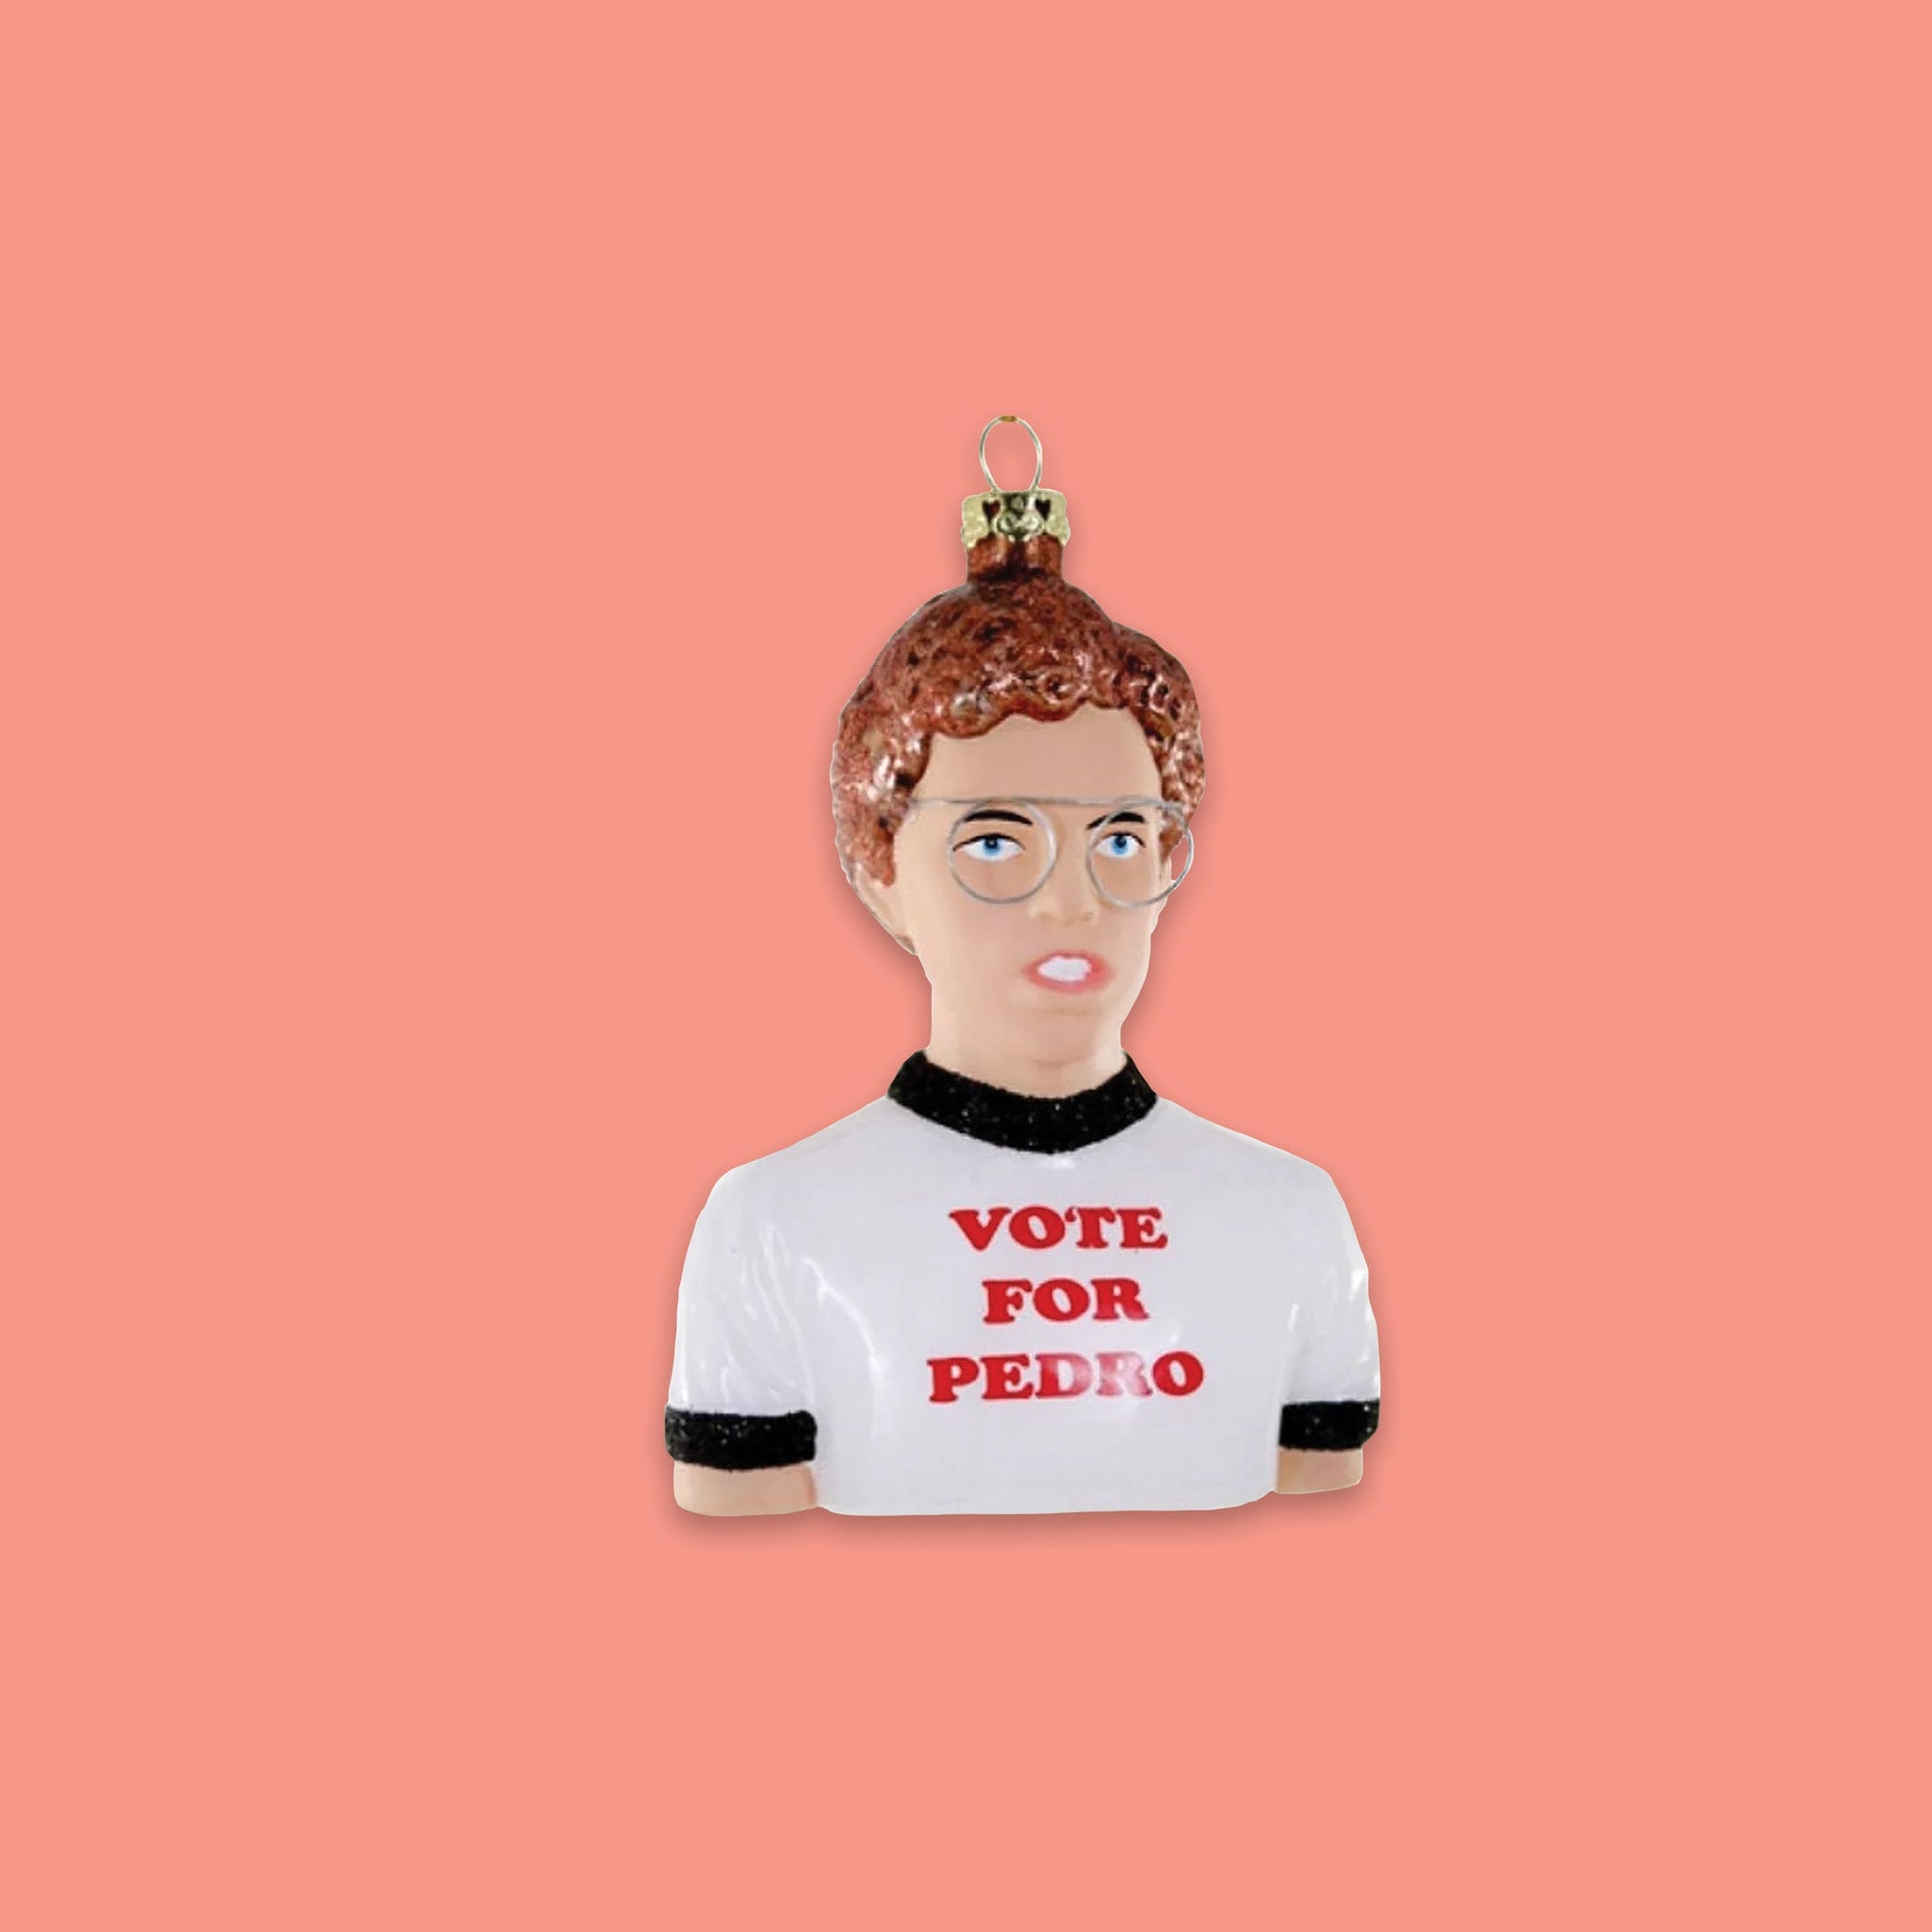 On a coral pink background sits an ornament. This Napoleon Dynament inspired glass ornament is a bust of Napoleon Dynamite himself. He is wearing the famous 'VOTE FOR PEDRO' tee.